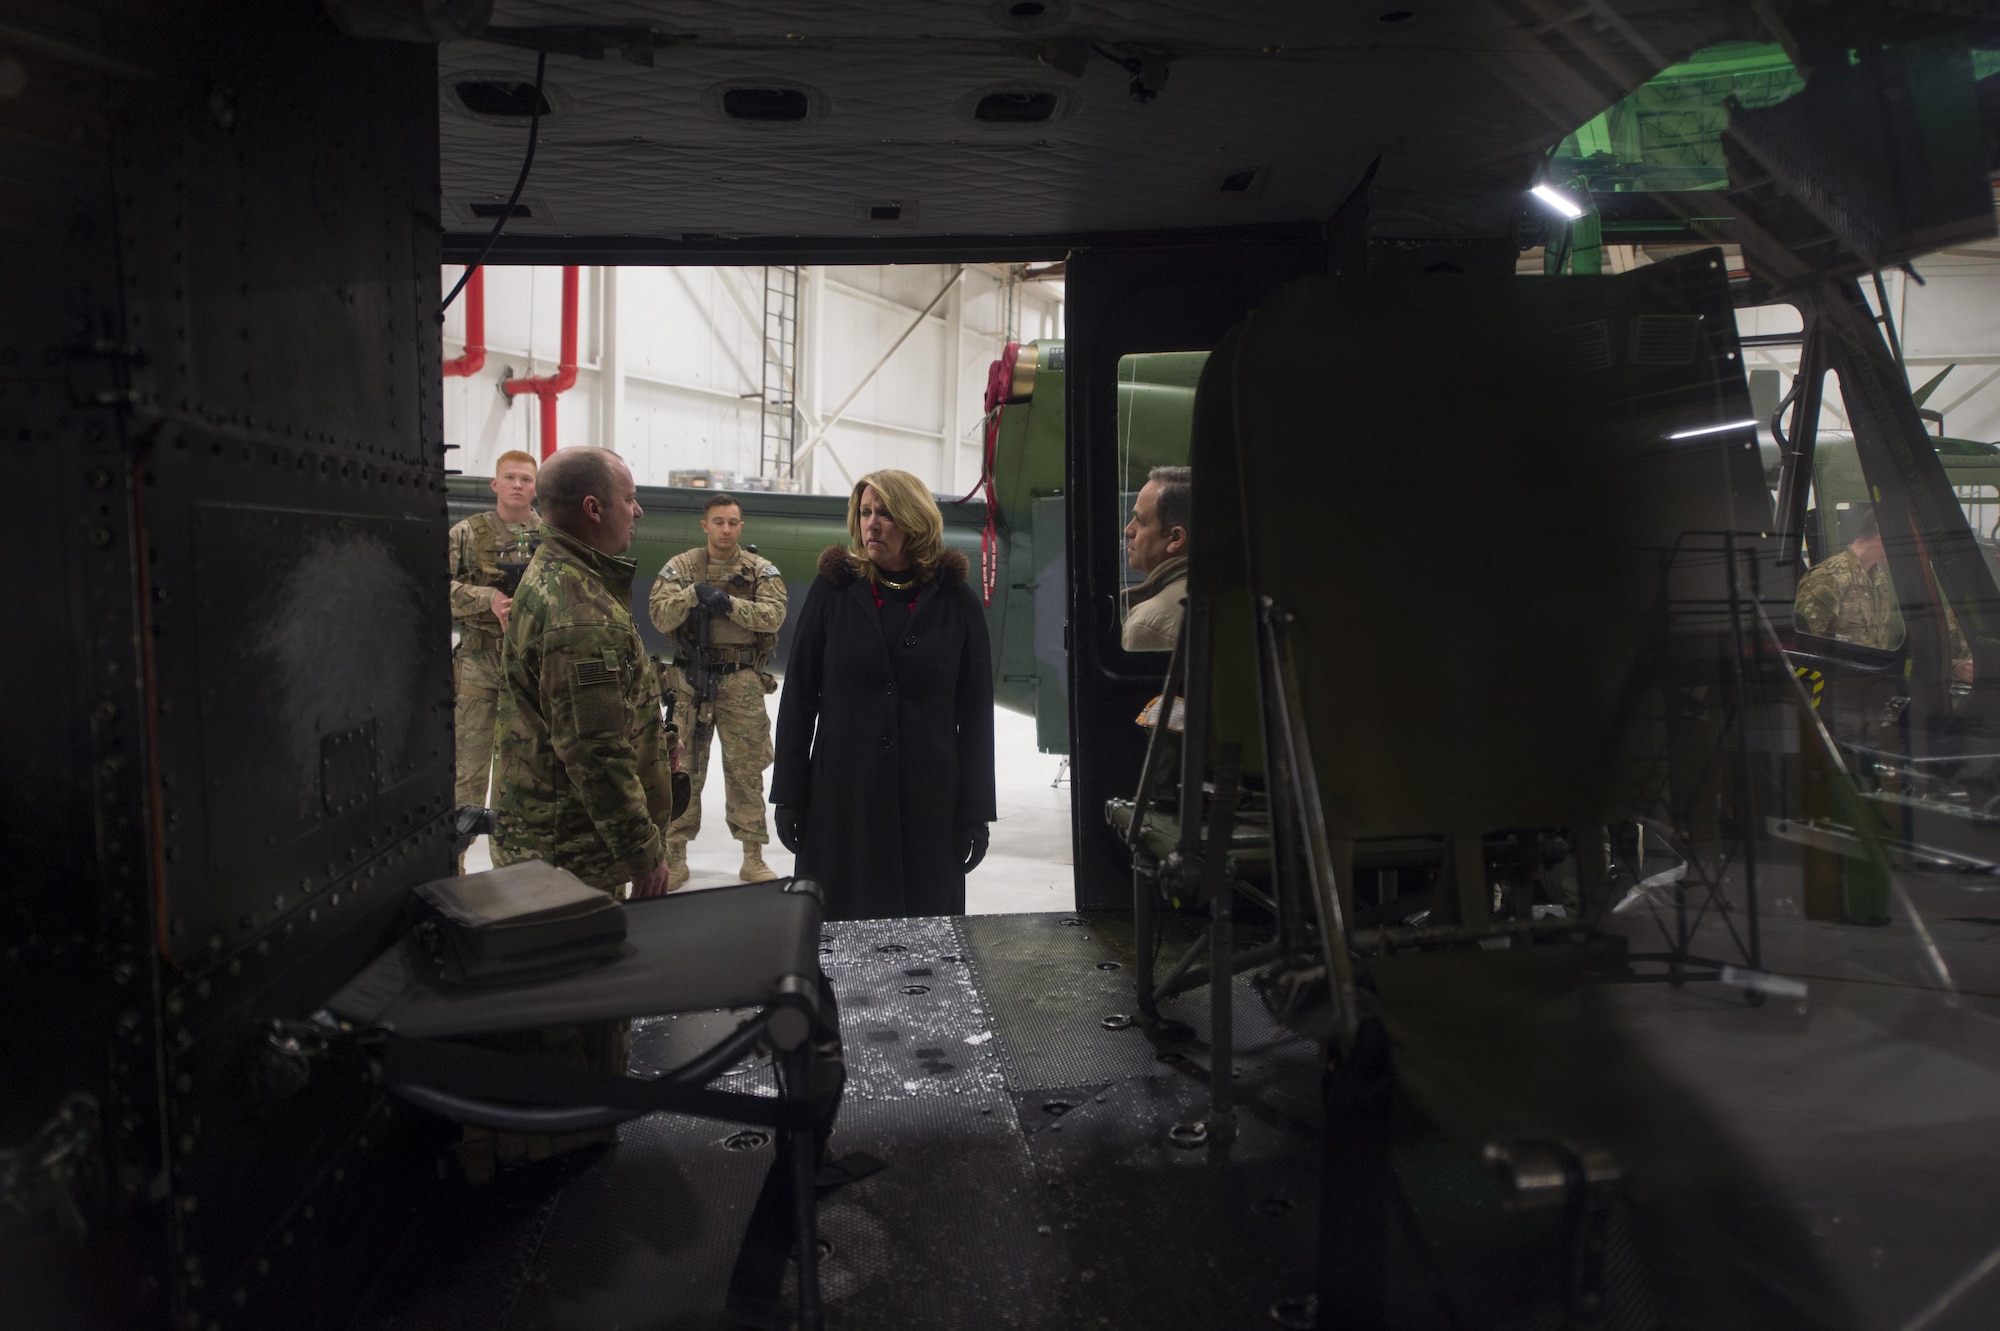 Secretary of the Air Force Deborah Lee James receives a briefing about the UH-1N “Huey” and its contribution to the ICBM mission at F.E. Warren Air Force Base, Wyo., Dec. 8, 2016. The 37th Helicopter Squadron plays an important role protecting America’s nuclear assets while on missile convoys and patrols in the missile complex. (U.S. Air Force photo by Staff Sgt. Christopher Ruano)